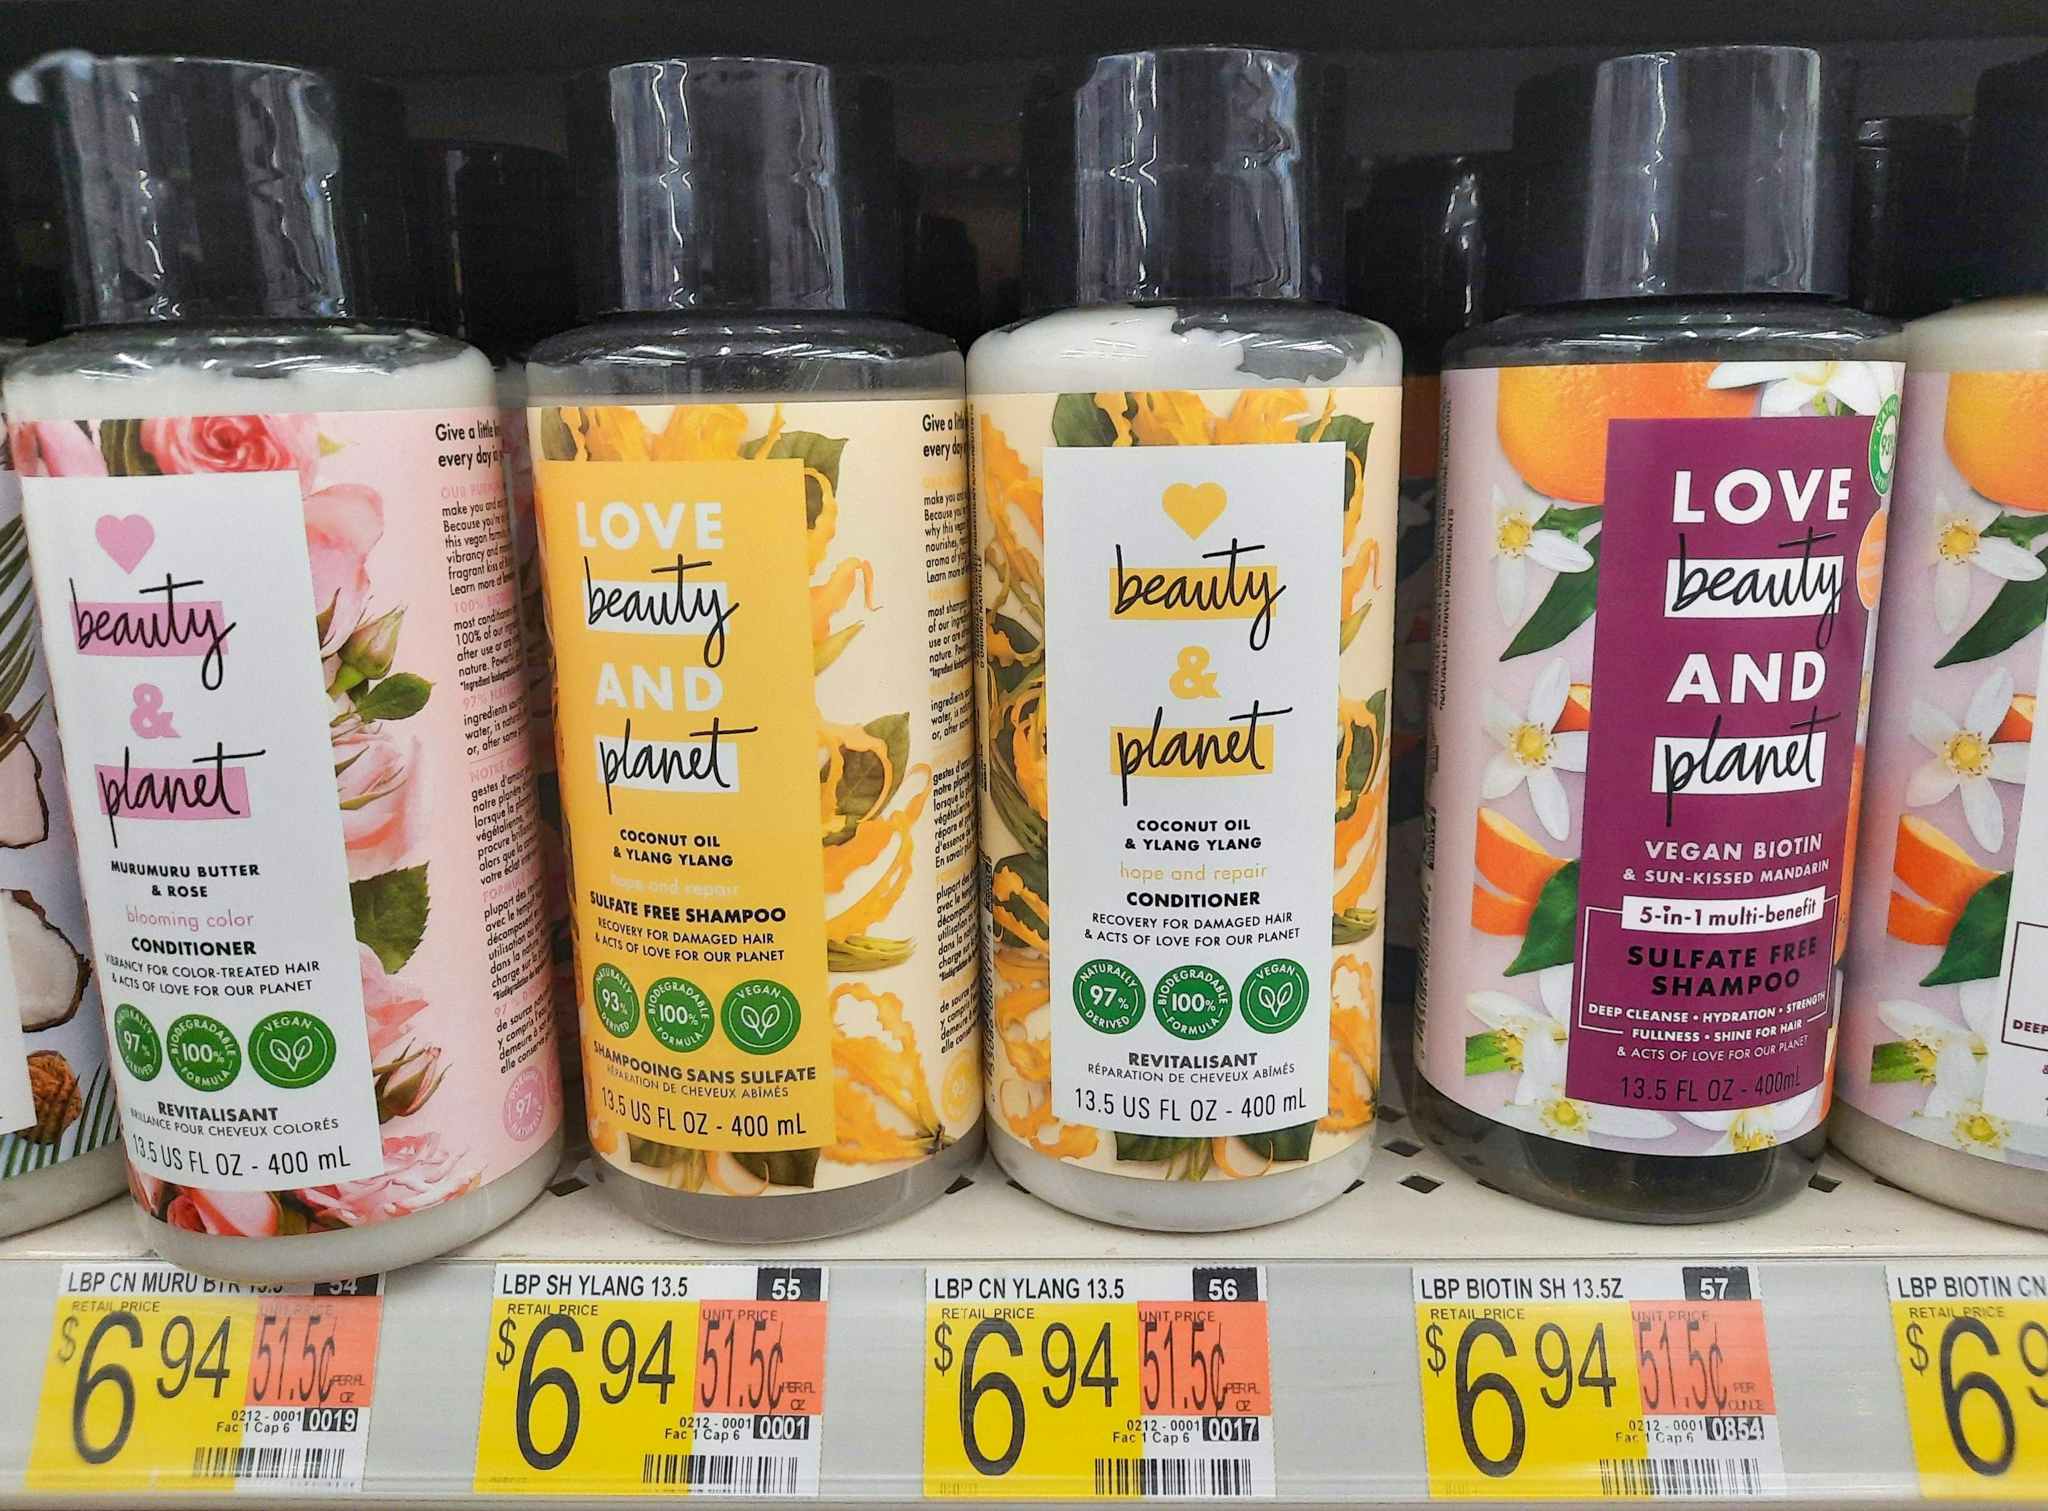 Love Beauty and Planet shampoo and conditioner at Walmart